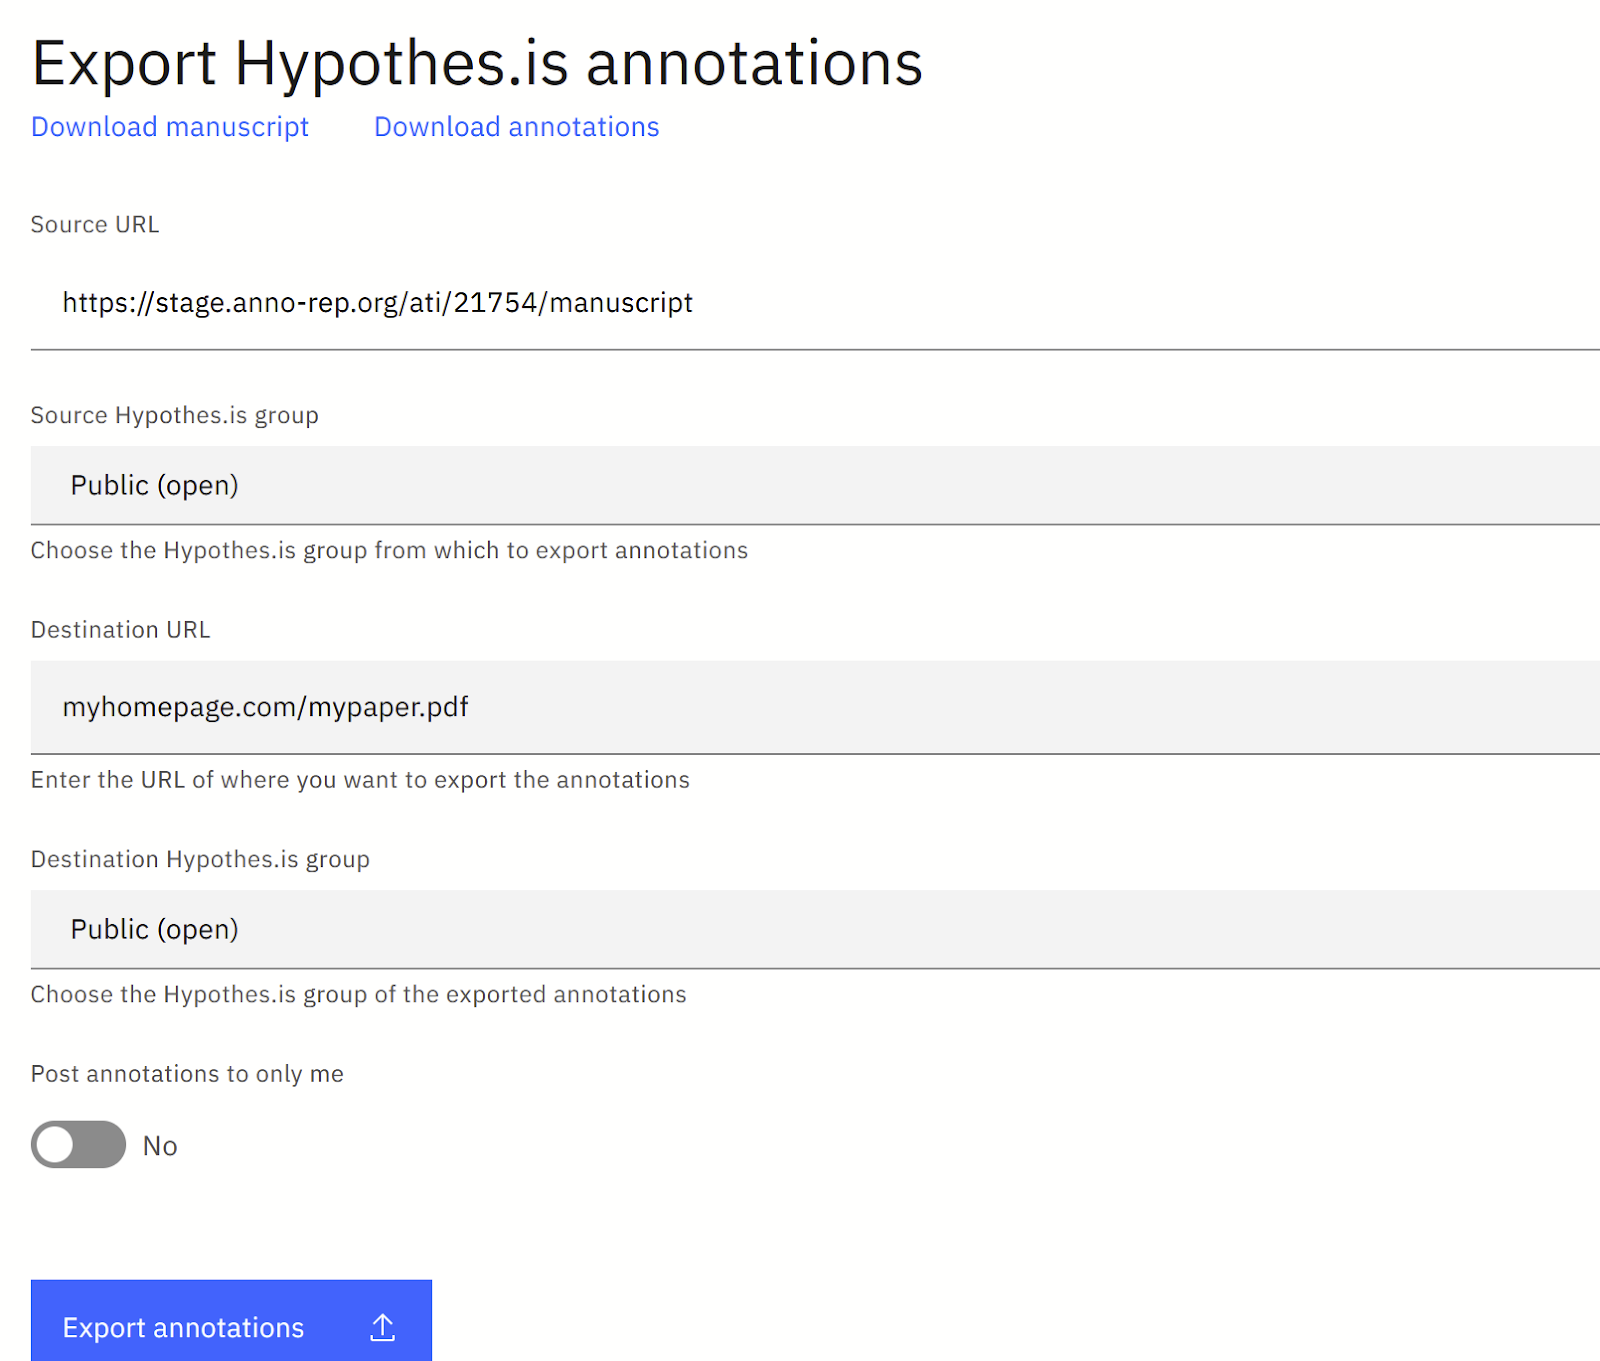 The "Export Hypothes.is annotations" screen showing options for sources and destinations